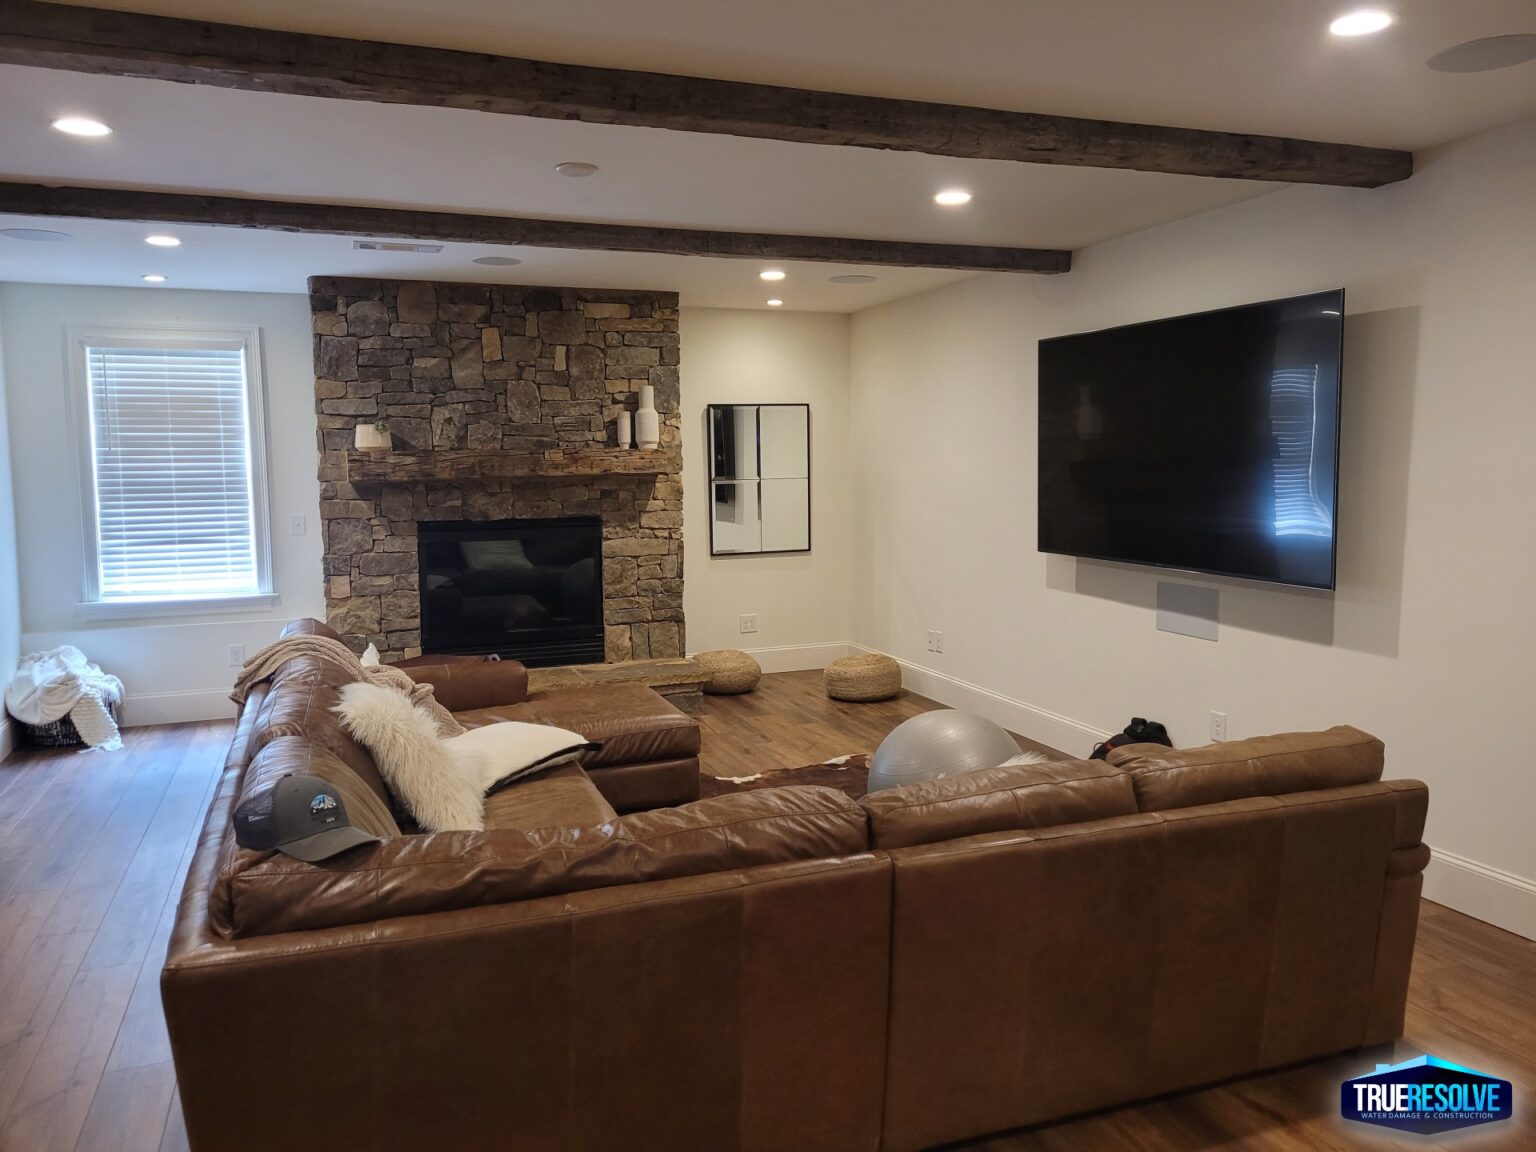 Cozy living room with stone fireplace and mounted TV.